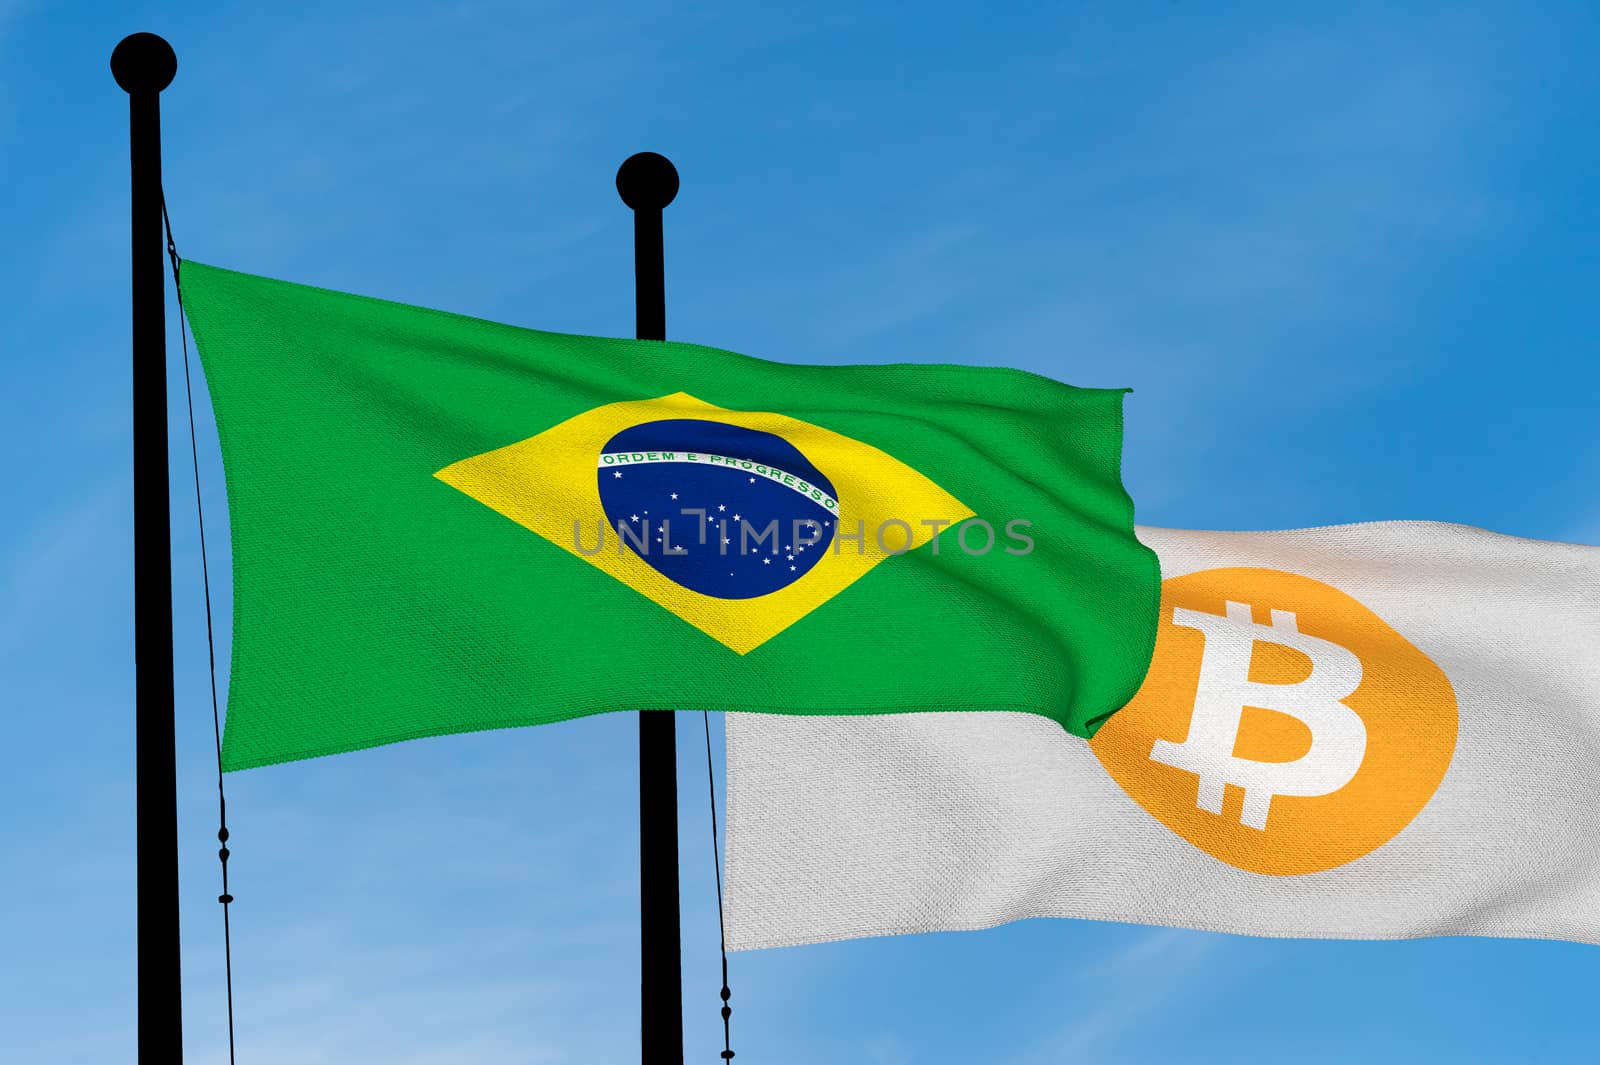 Brazil flag and Bitcoin Flag waving over blue sky (digitally generated image)